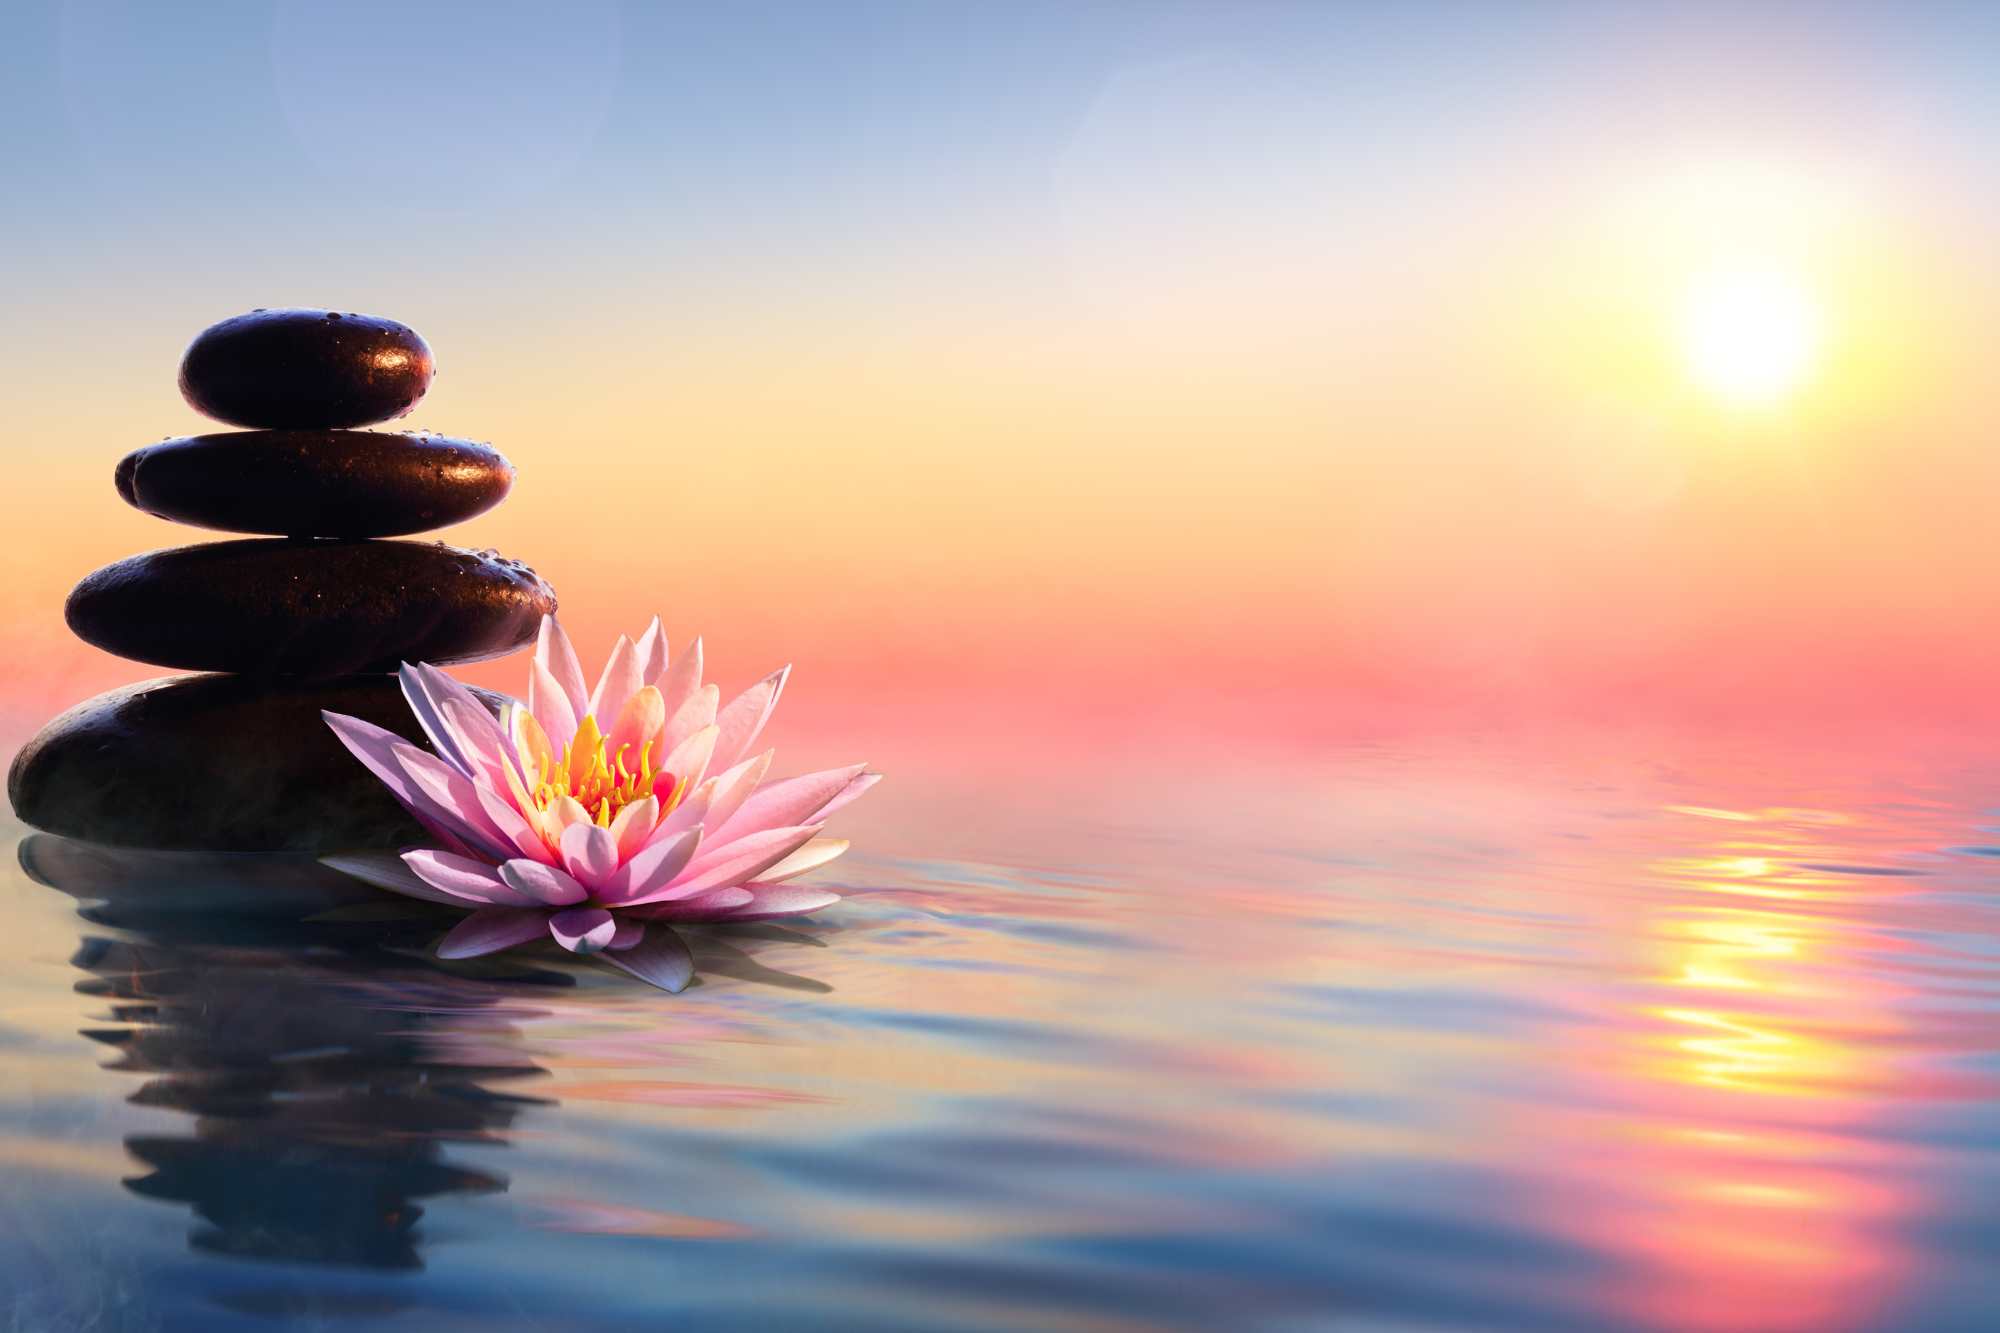 lotus flower in water at sunset beside a stack of rocks